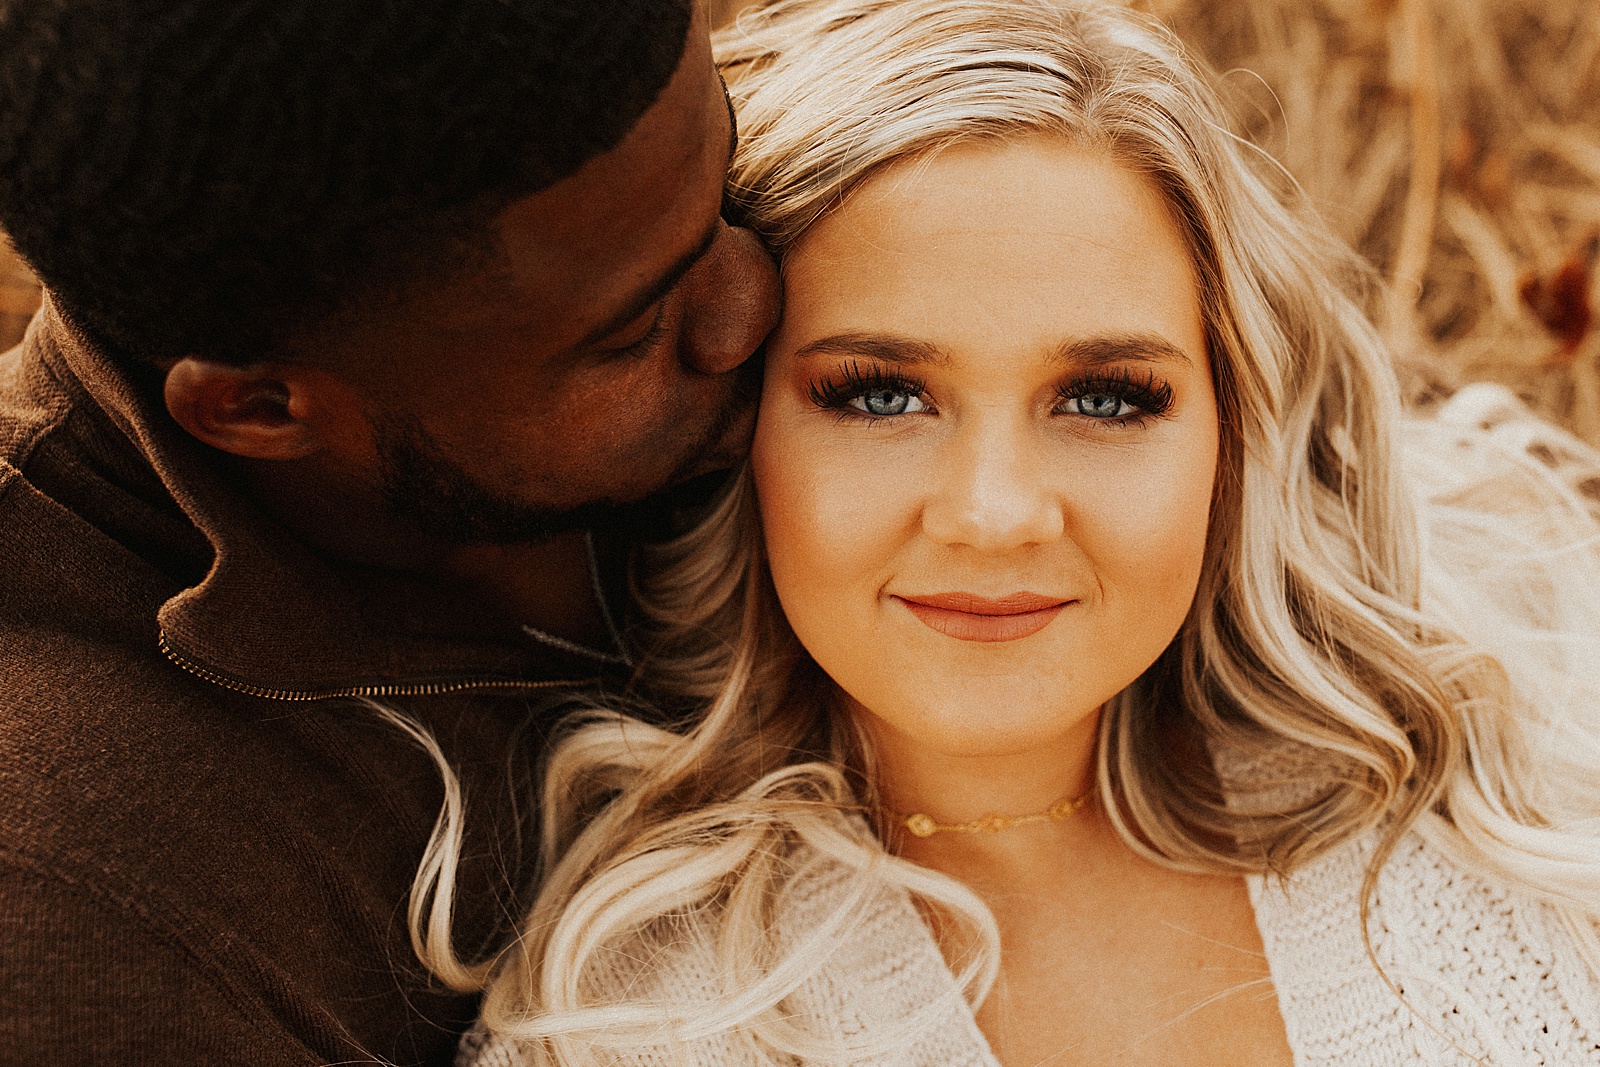 Playful fall engagement pictures in Abilene, TX.